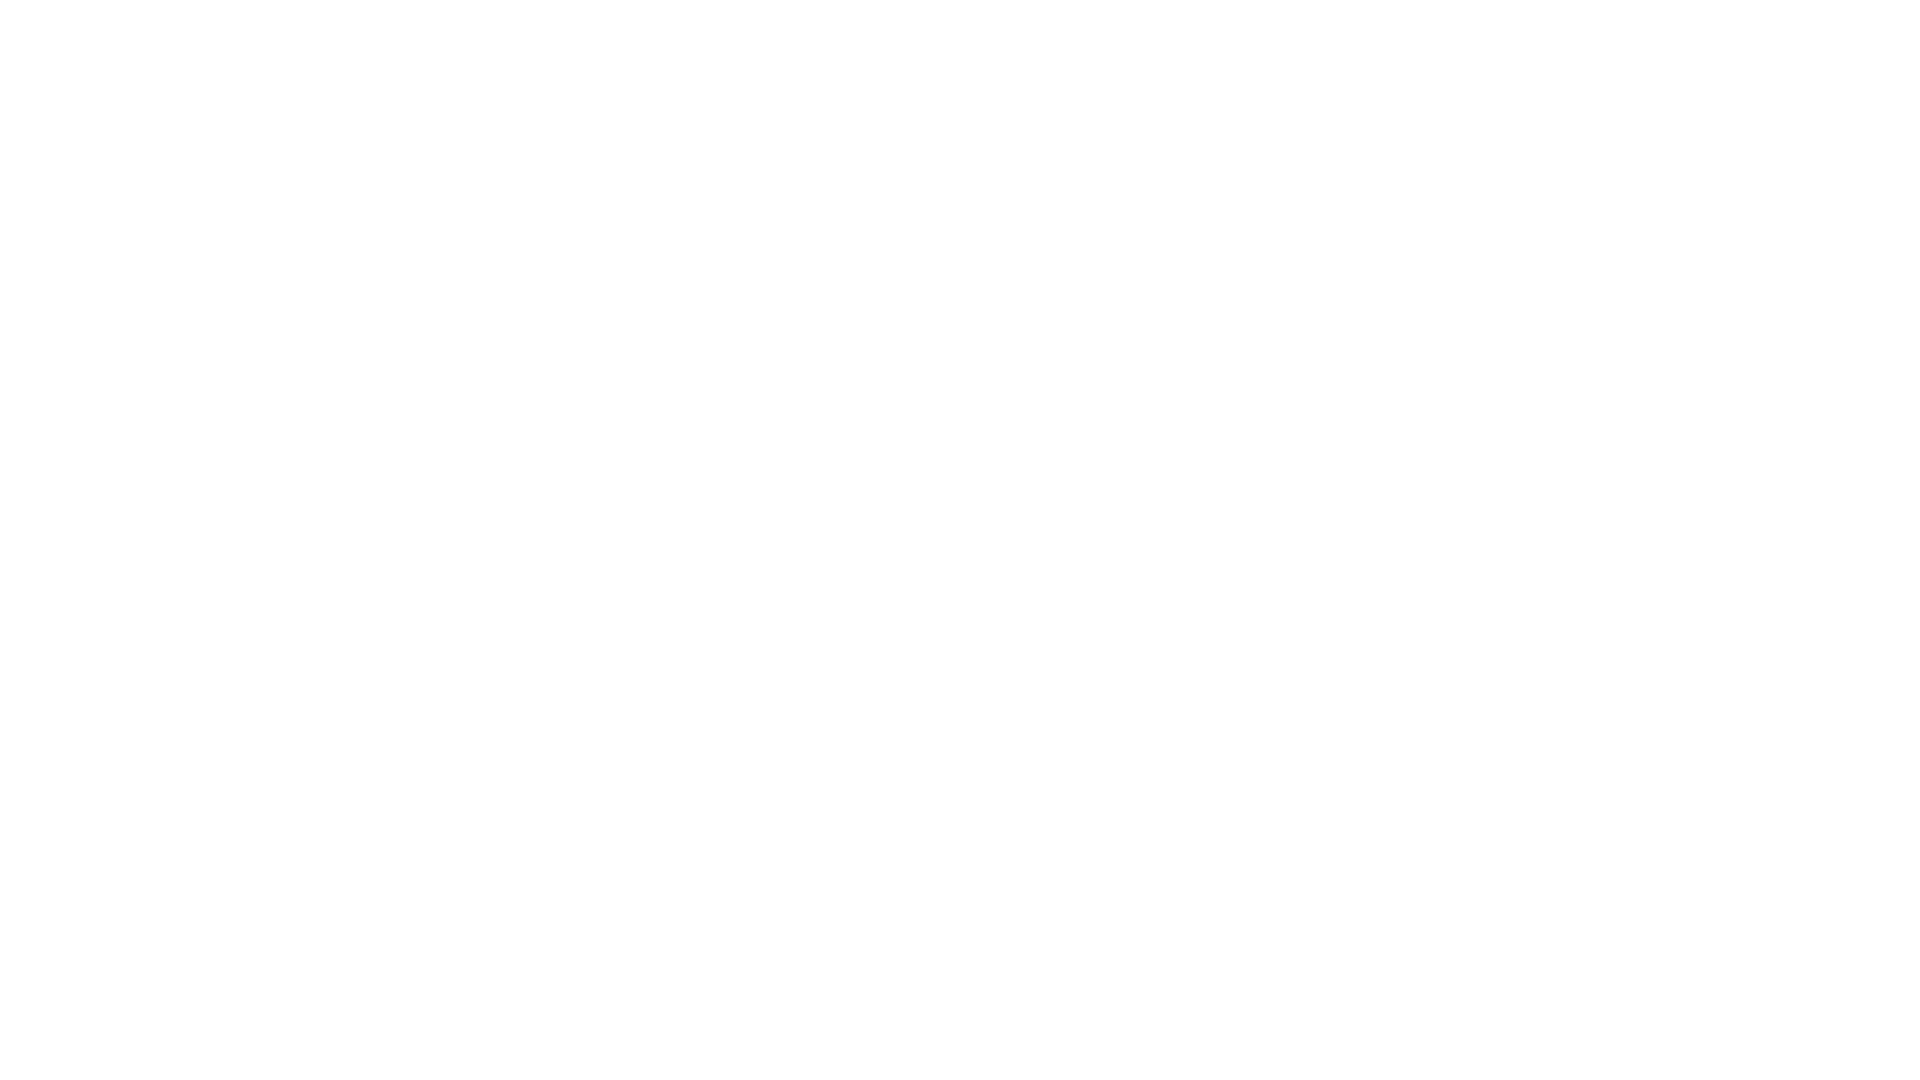 Christ for the Nations has had 75 Years of Global Impact